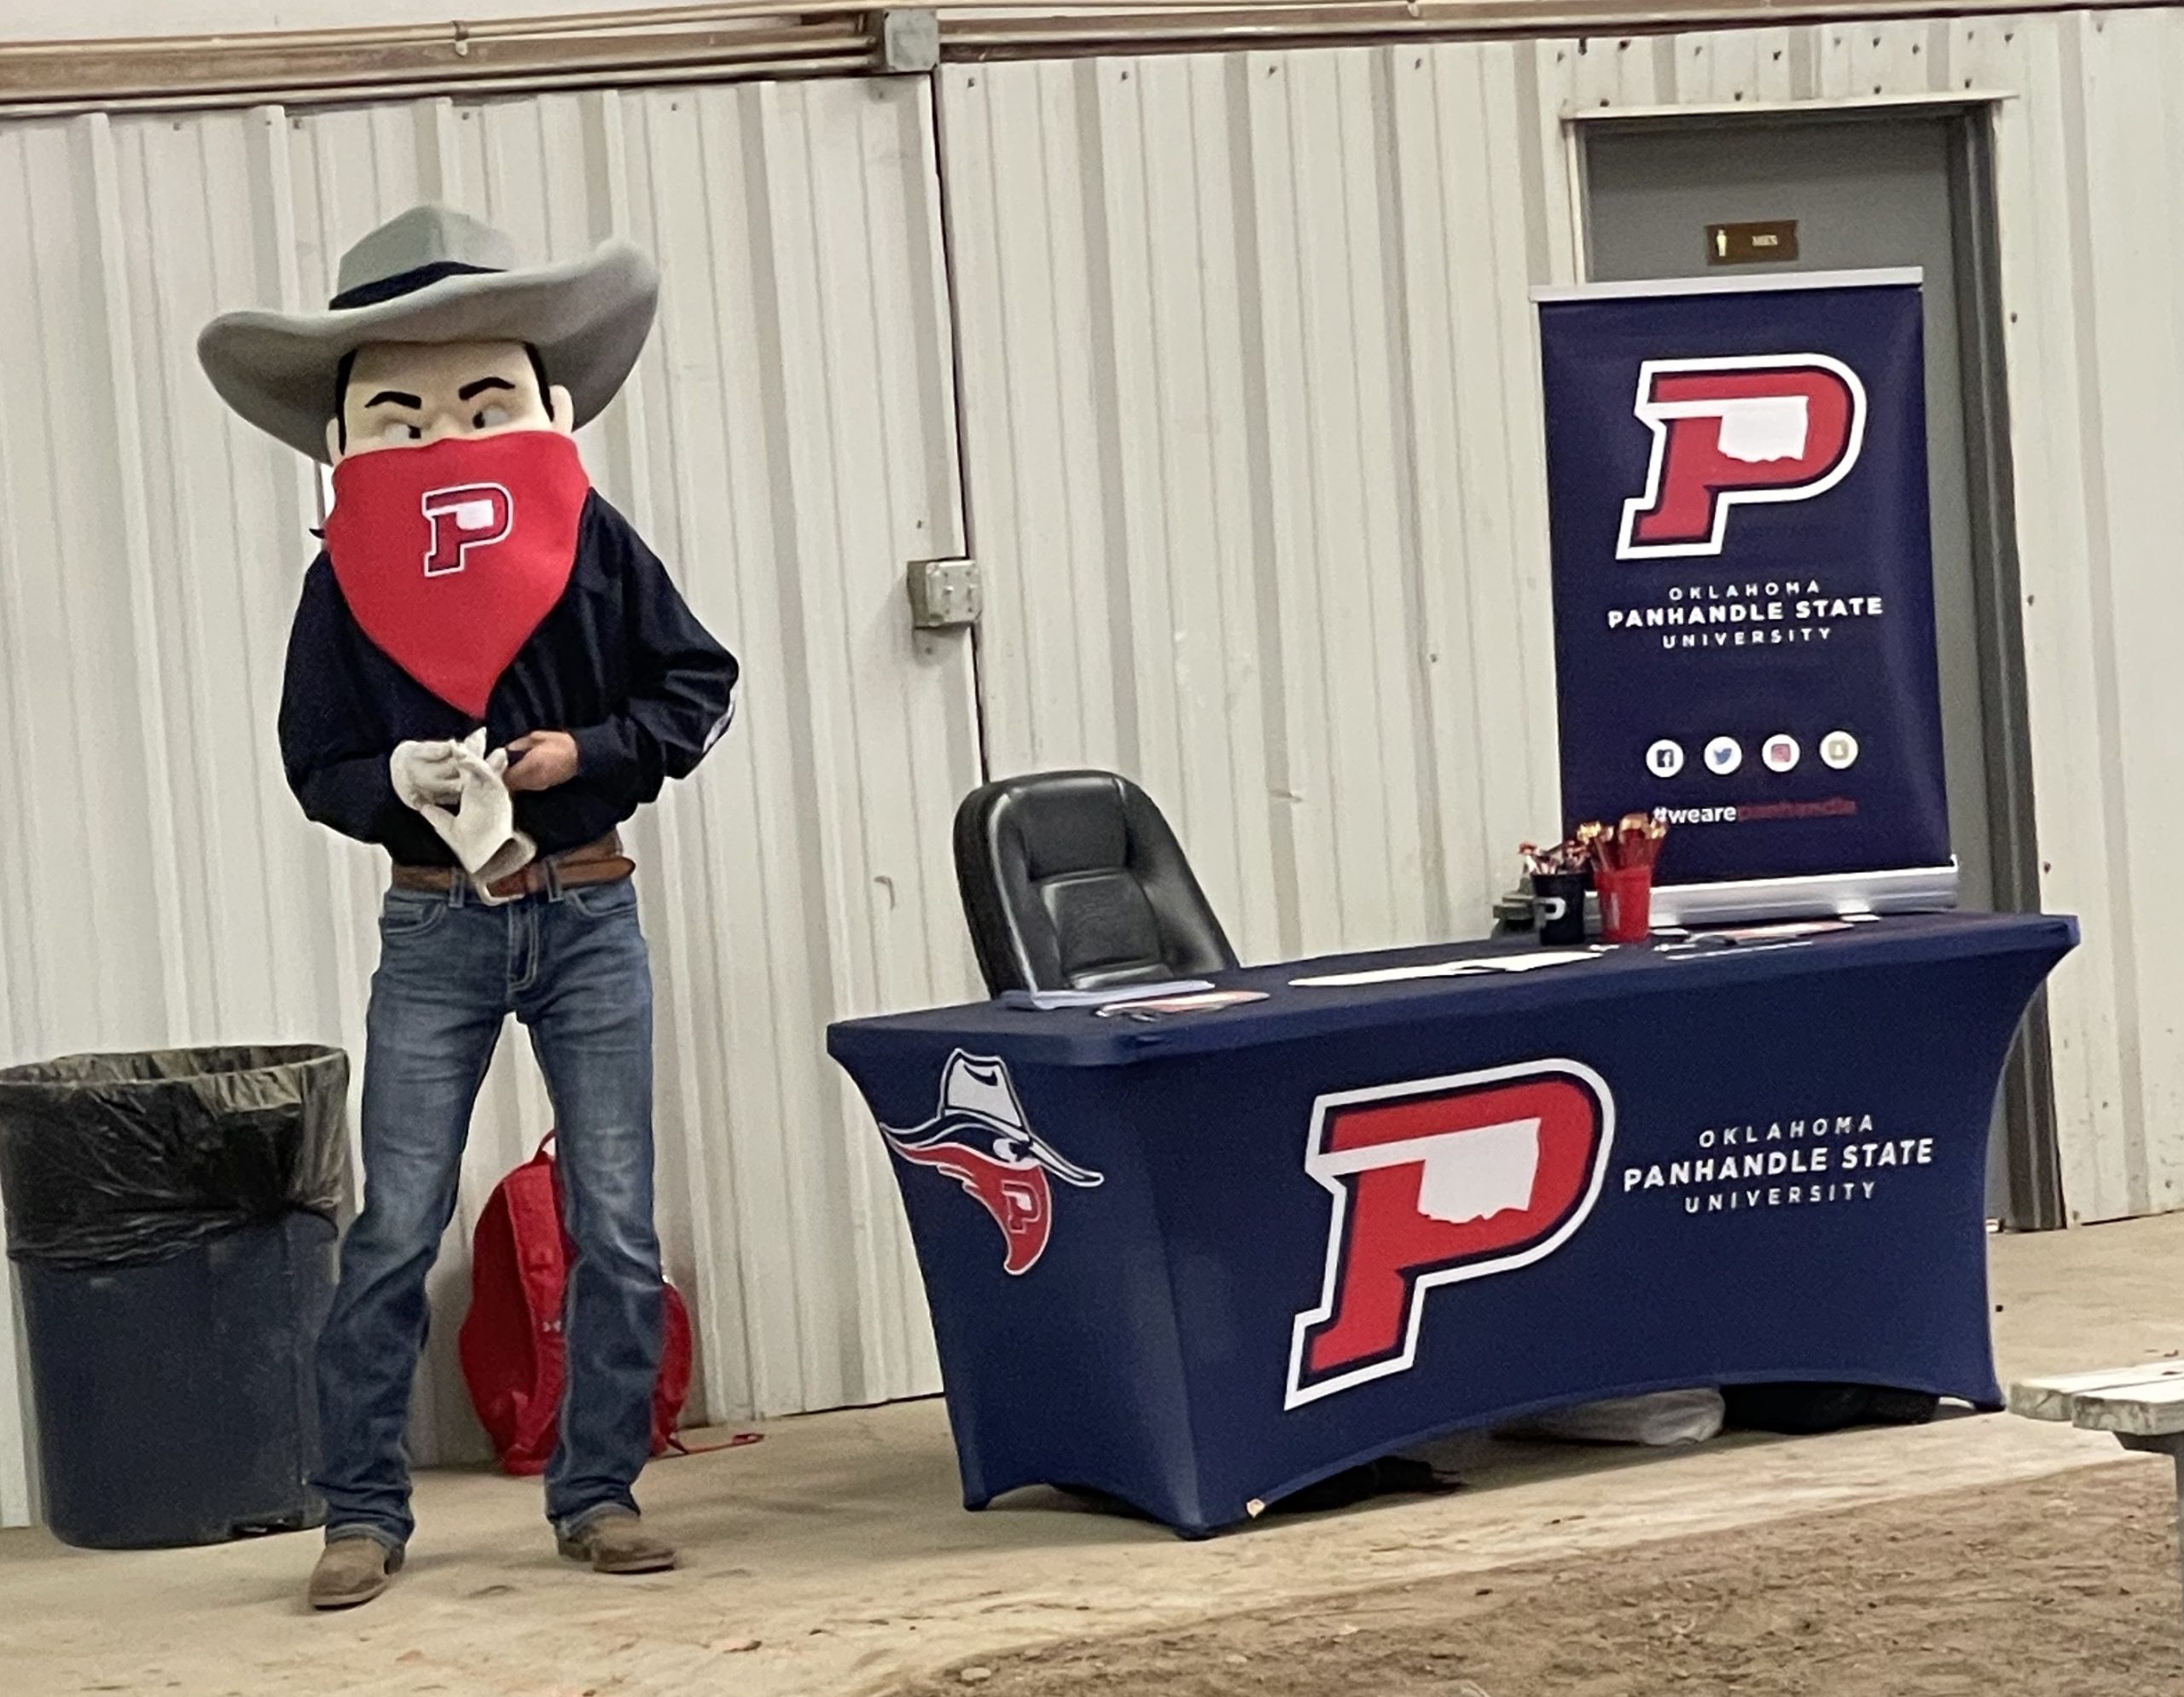 The Oklahoma Panhandle State University Aggie mascot attended the recent Panhandle Showdown hosted by the OPSU Livestock Showing team. (Journal photo by Jennifer Theurer.)